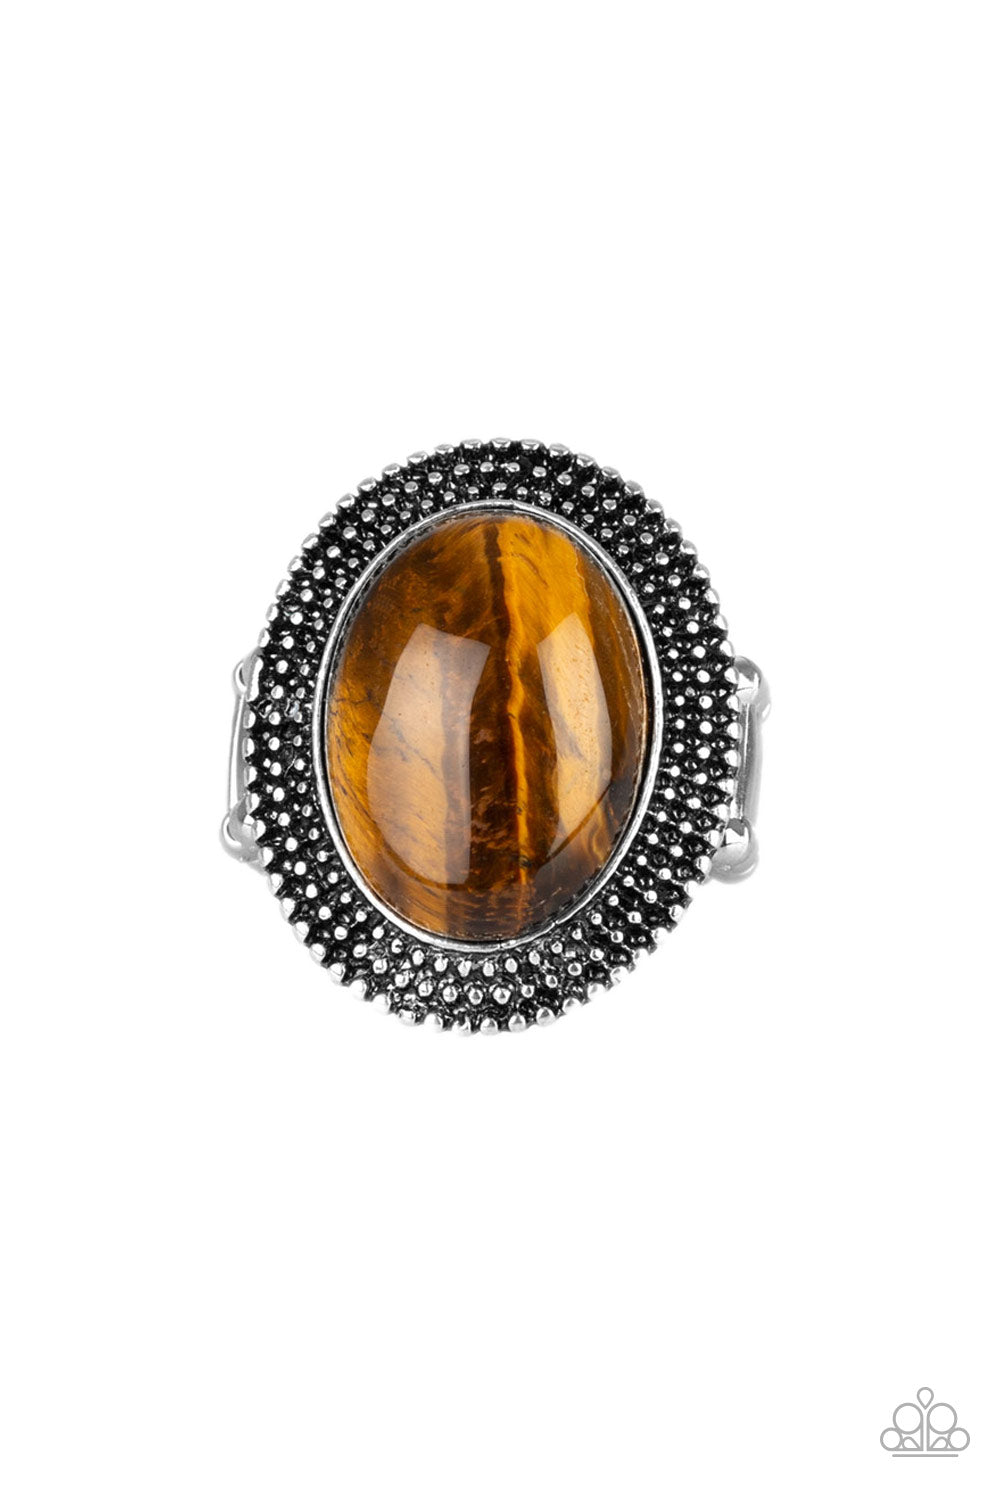 OUTDOOR OASIS - BROWN OVAL TIGER EYE RING